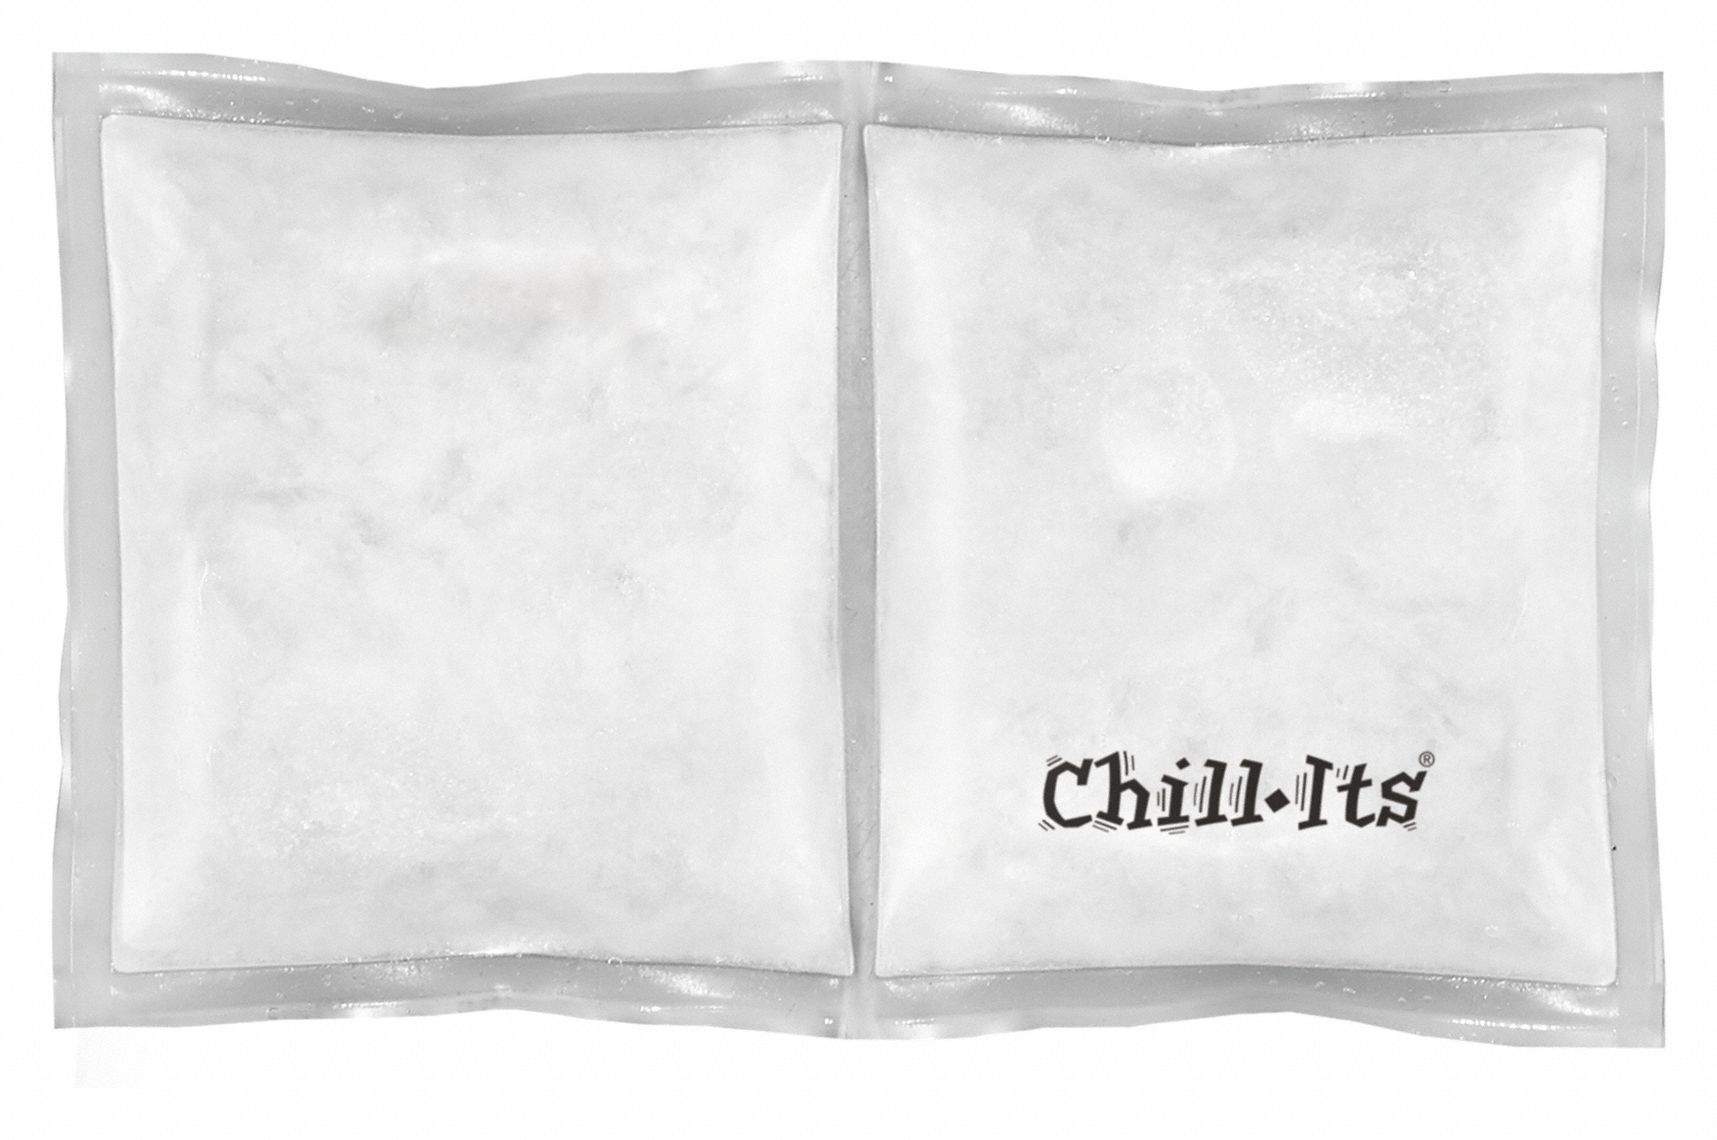 Ice Packs at : Direct Source for Canada –